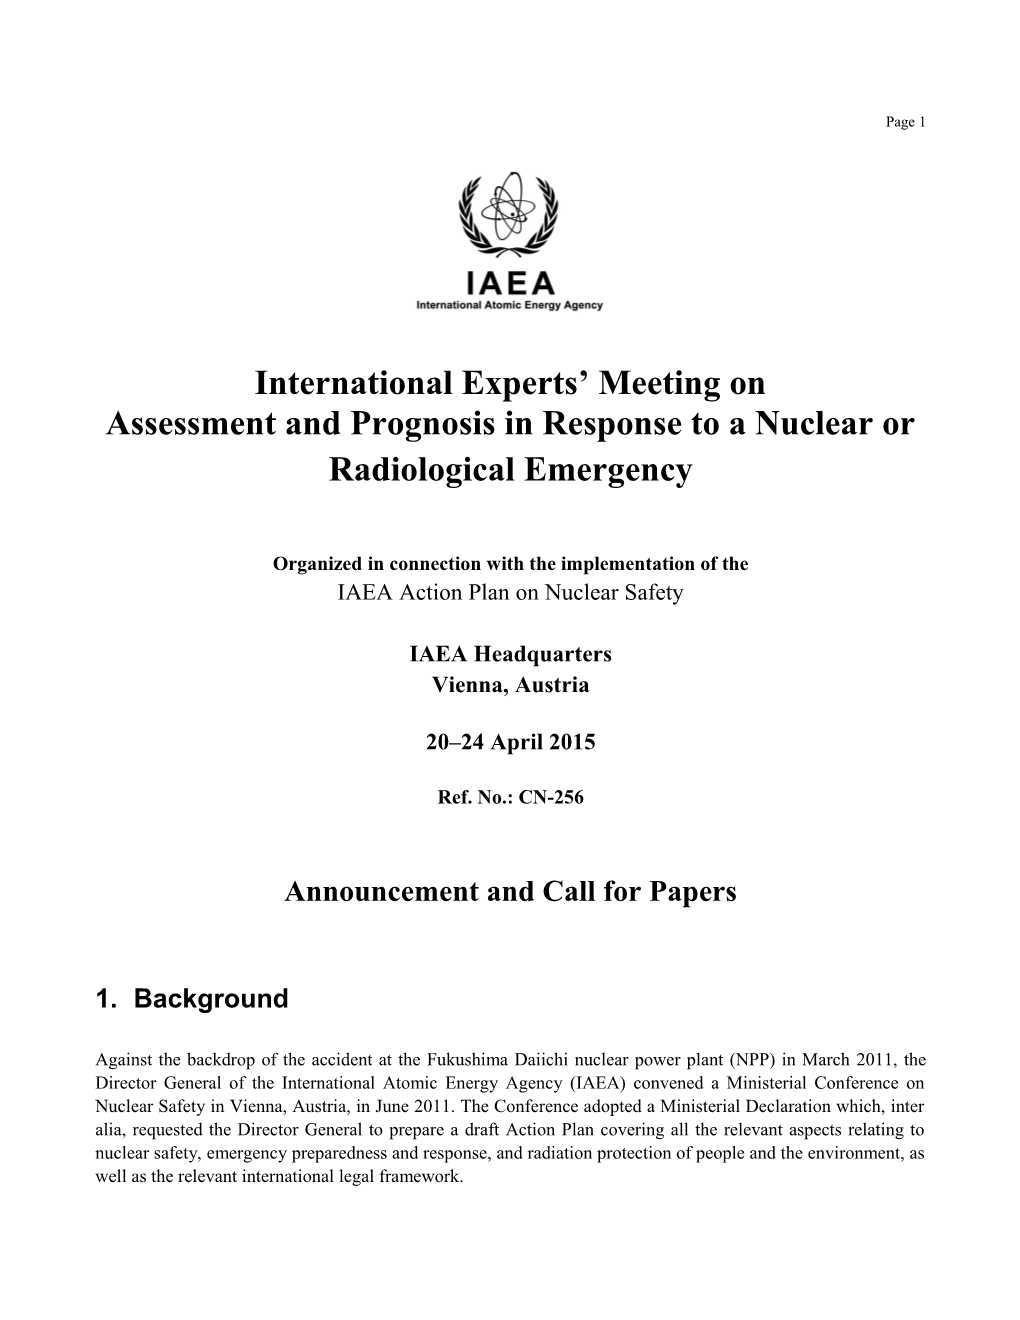 Assessment and Prognosis in Response to a Nuclear Or Radiological Emergency